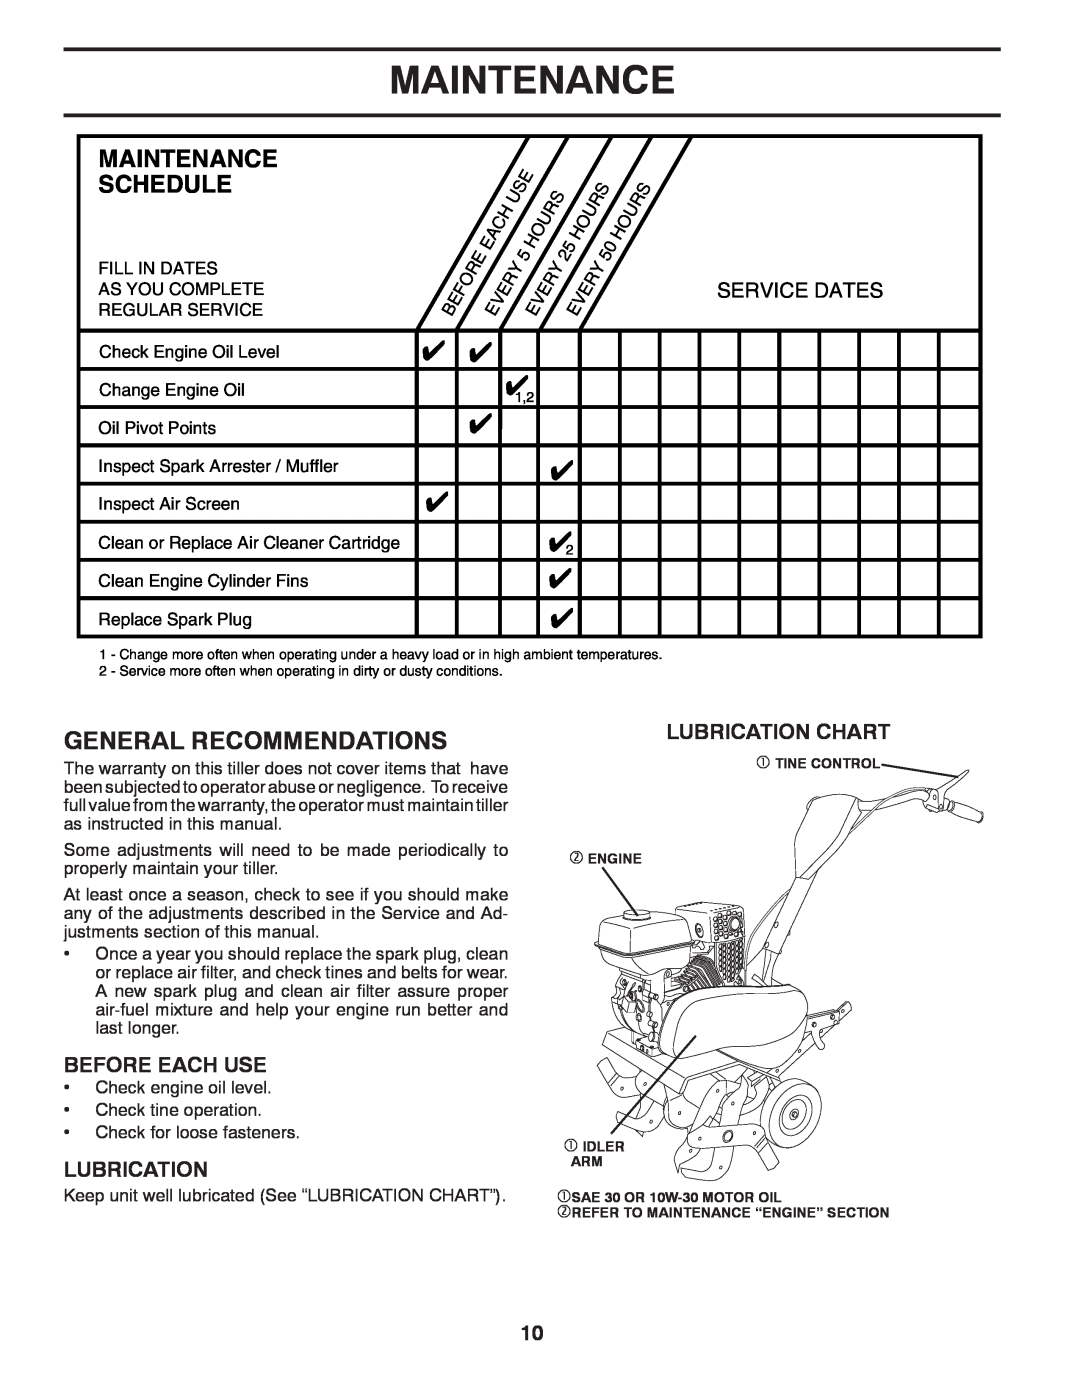 McCulloch 96083000400 manual General Recommendations, Maintenance Schedule, Service Dates, Before Each Use, Lubrication 